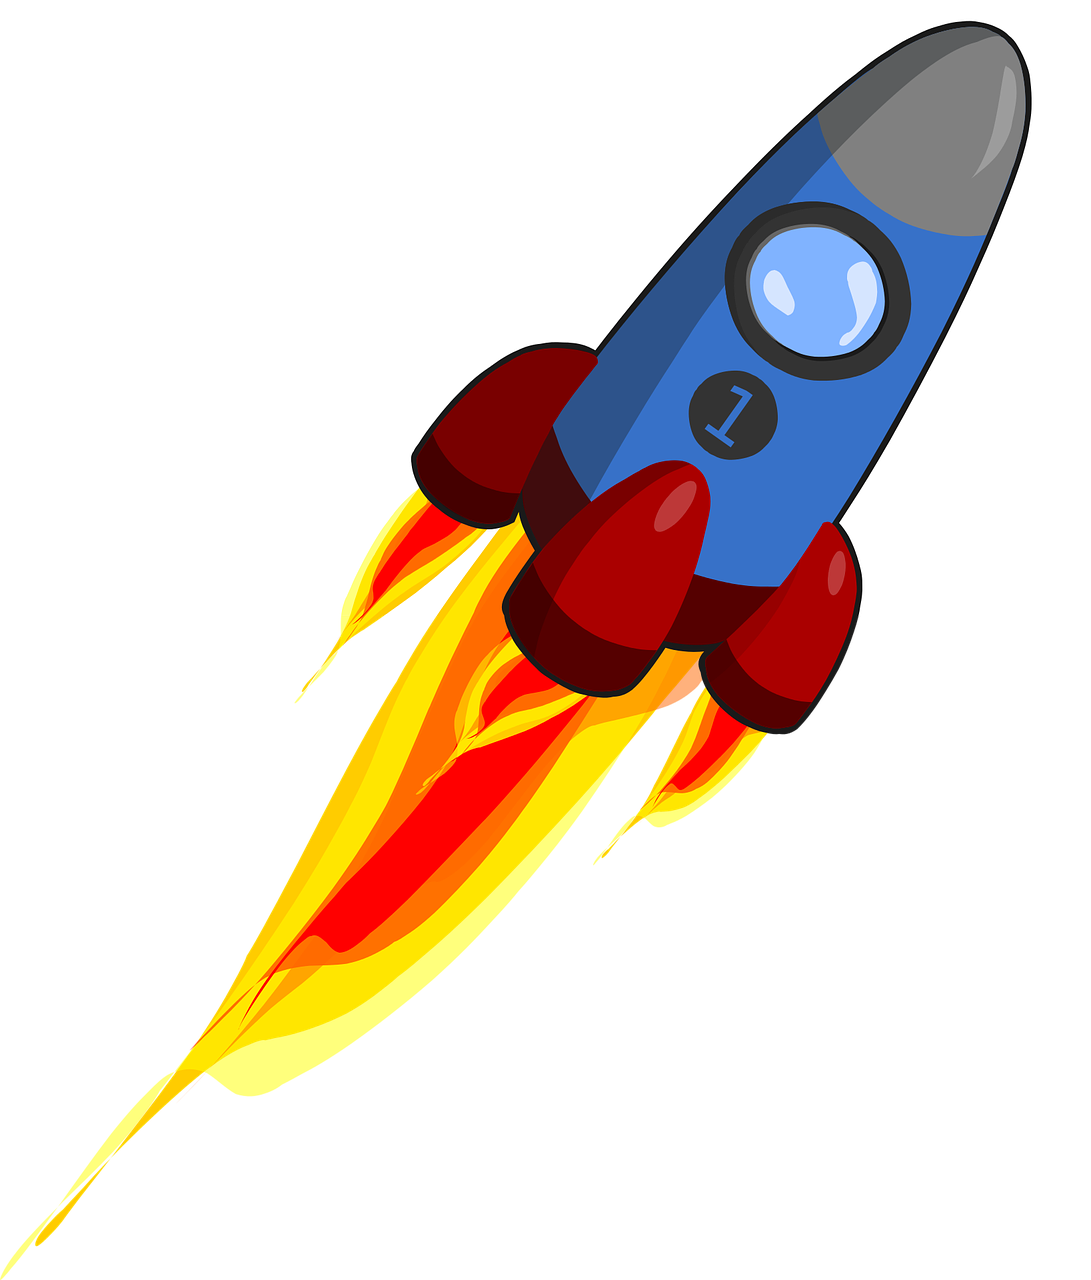 a blue and red rocket ship flying through the air, vector art, space art, acrace catoon, flash photo, 1 : 1 hyper illustration, flaming